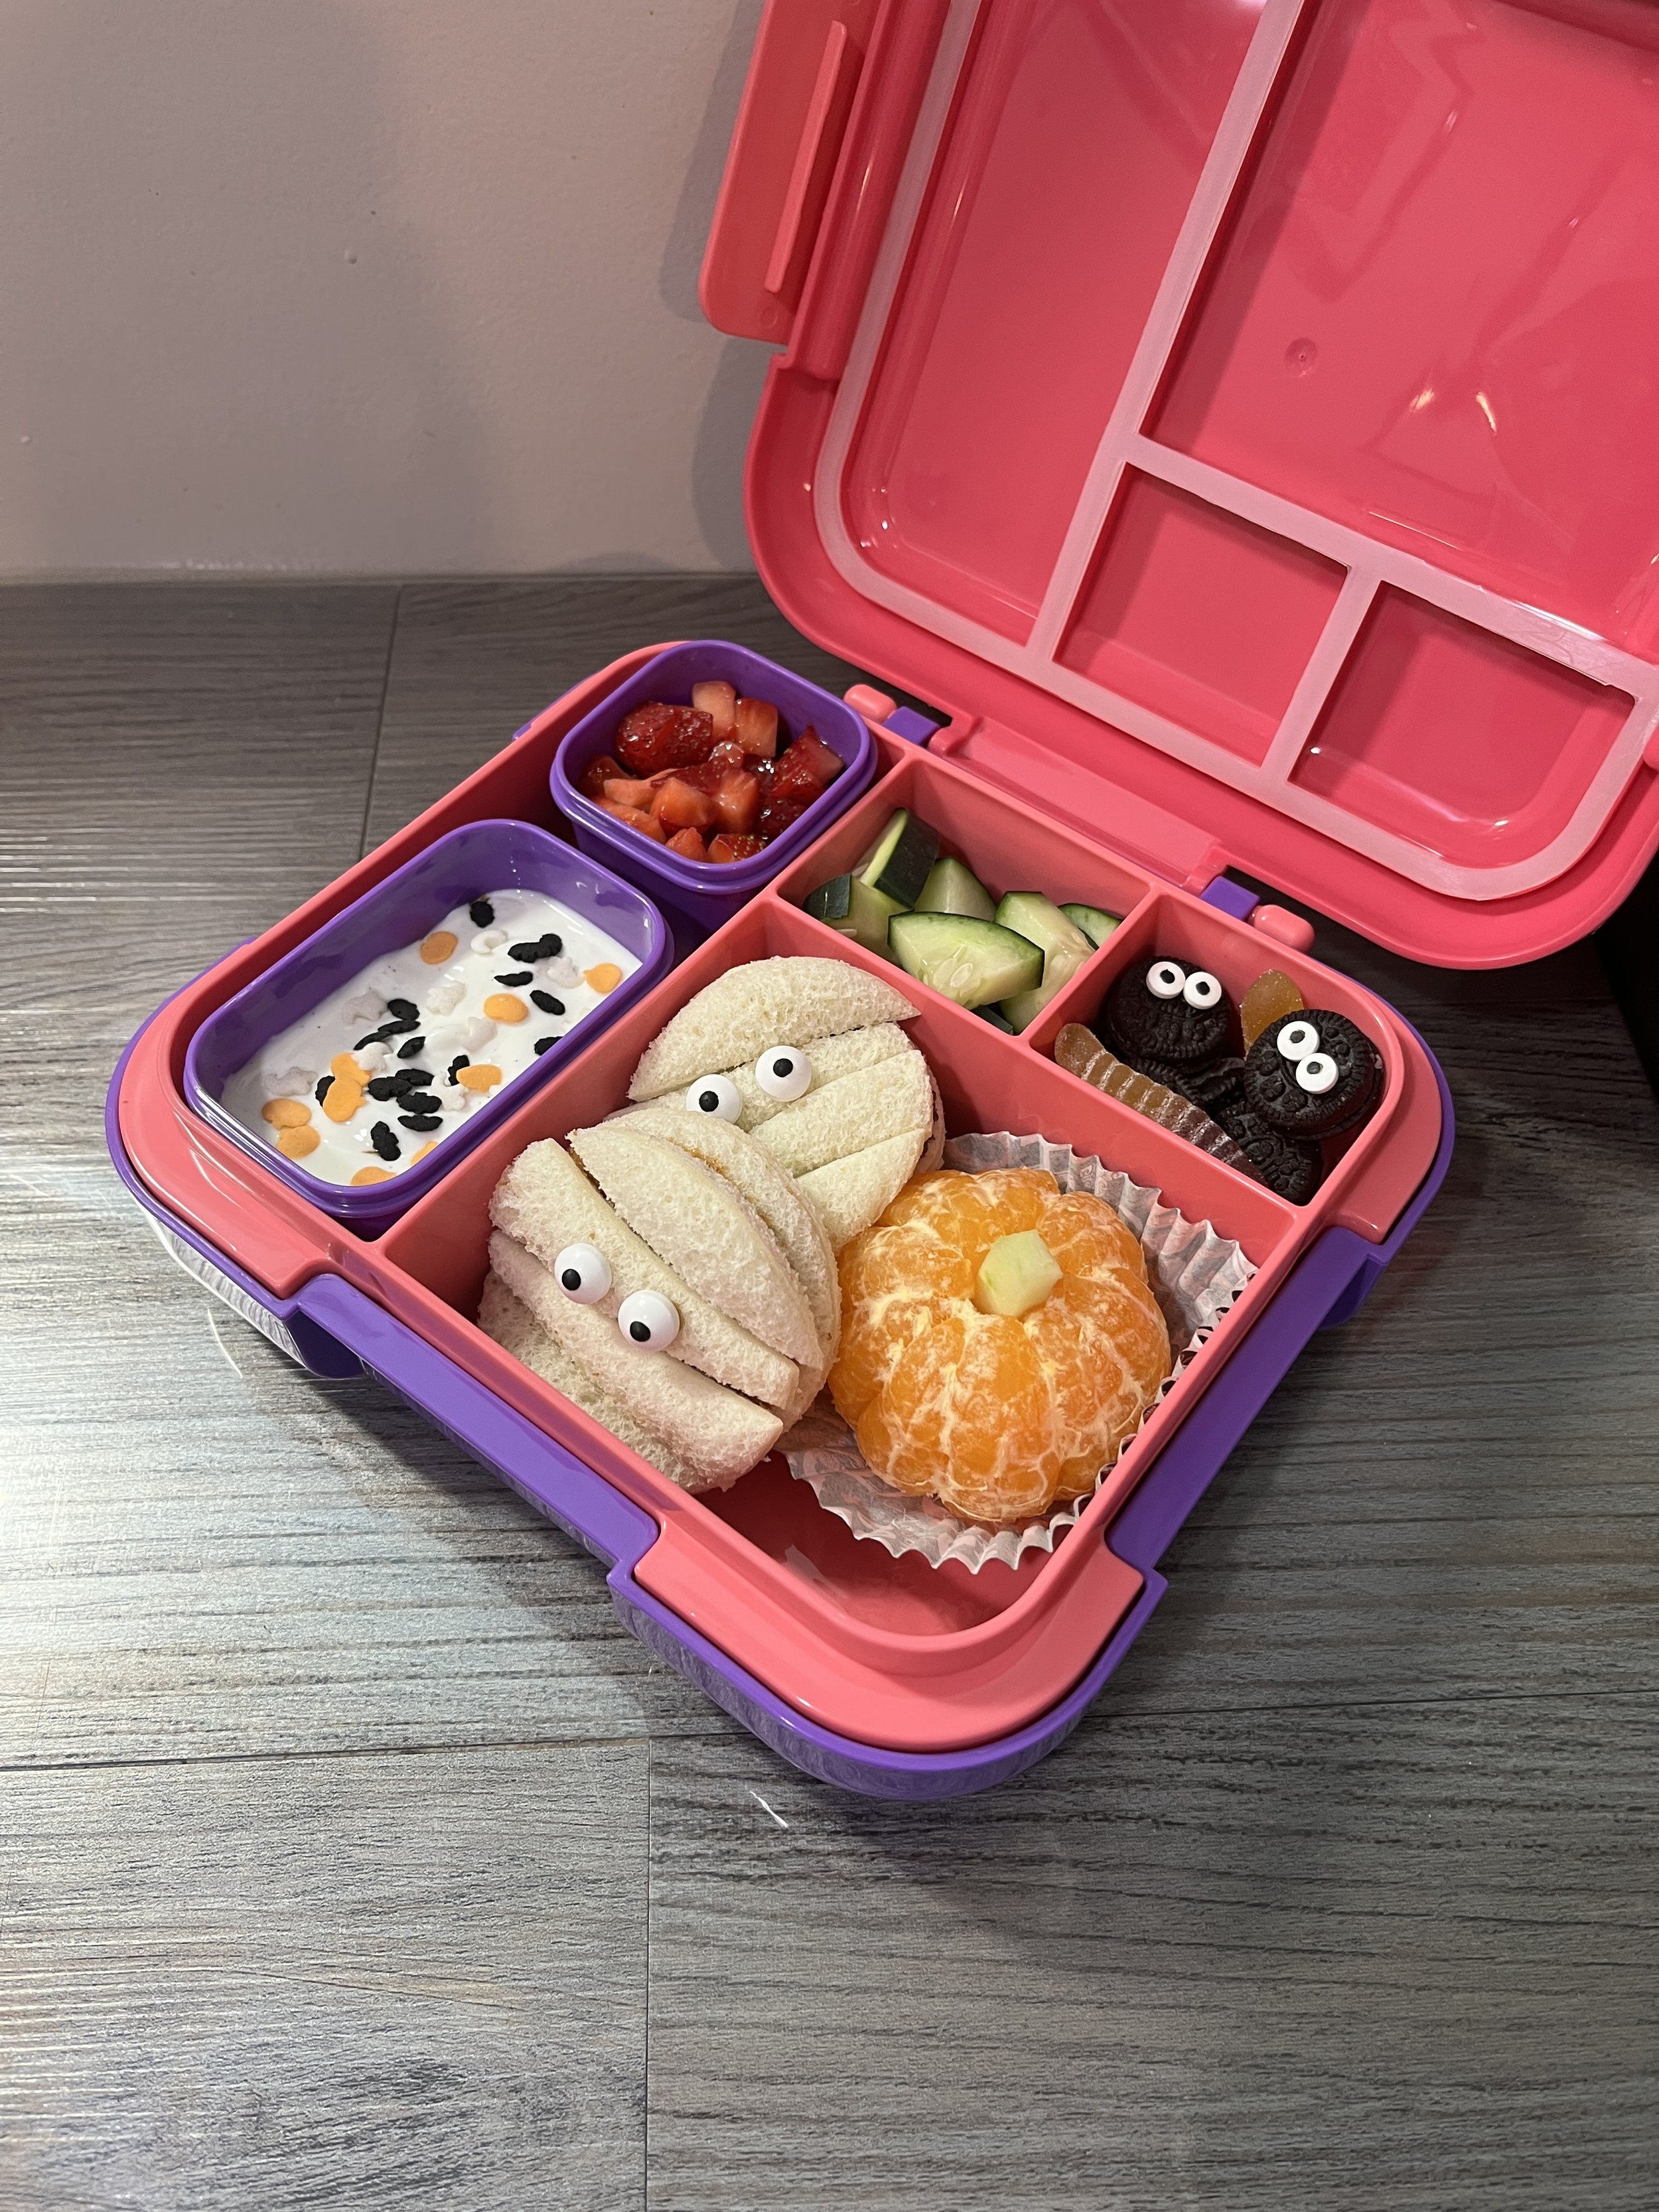 👻 Let’s Get Ready For Halloween - Halloween Bento Box 👻 | NEW Caperci Bento Box Review